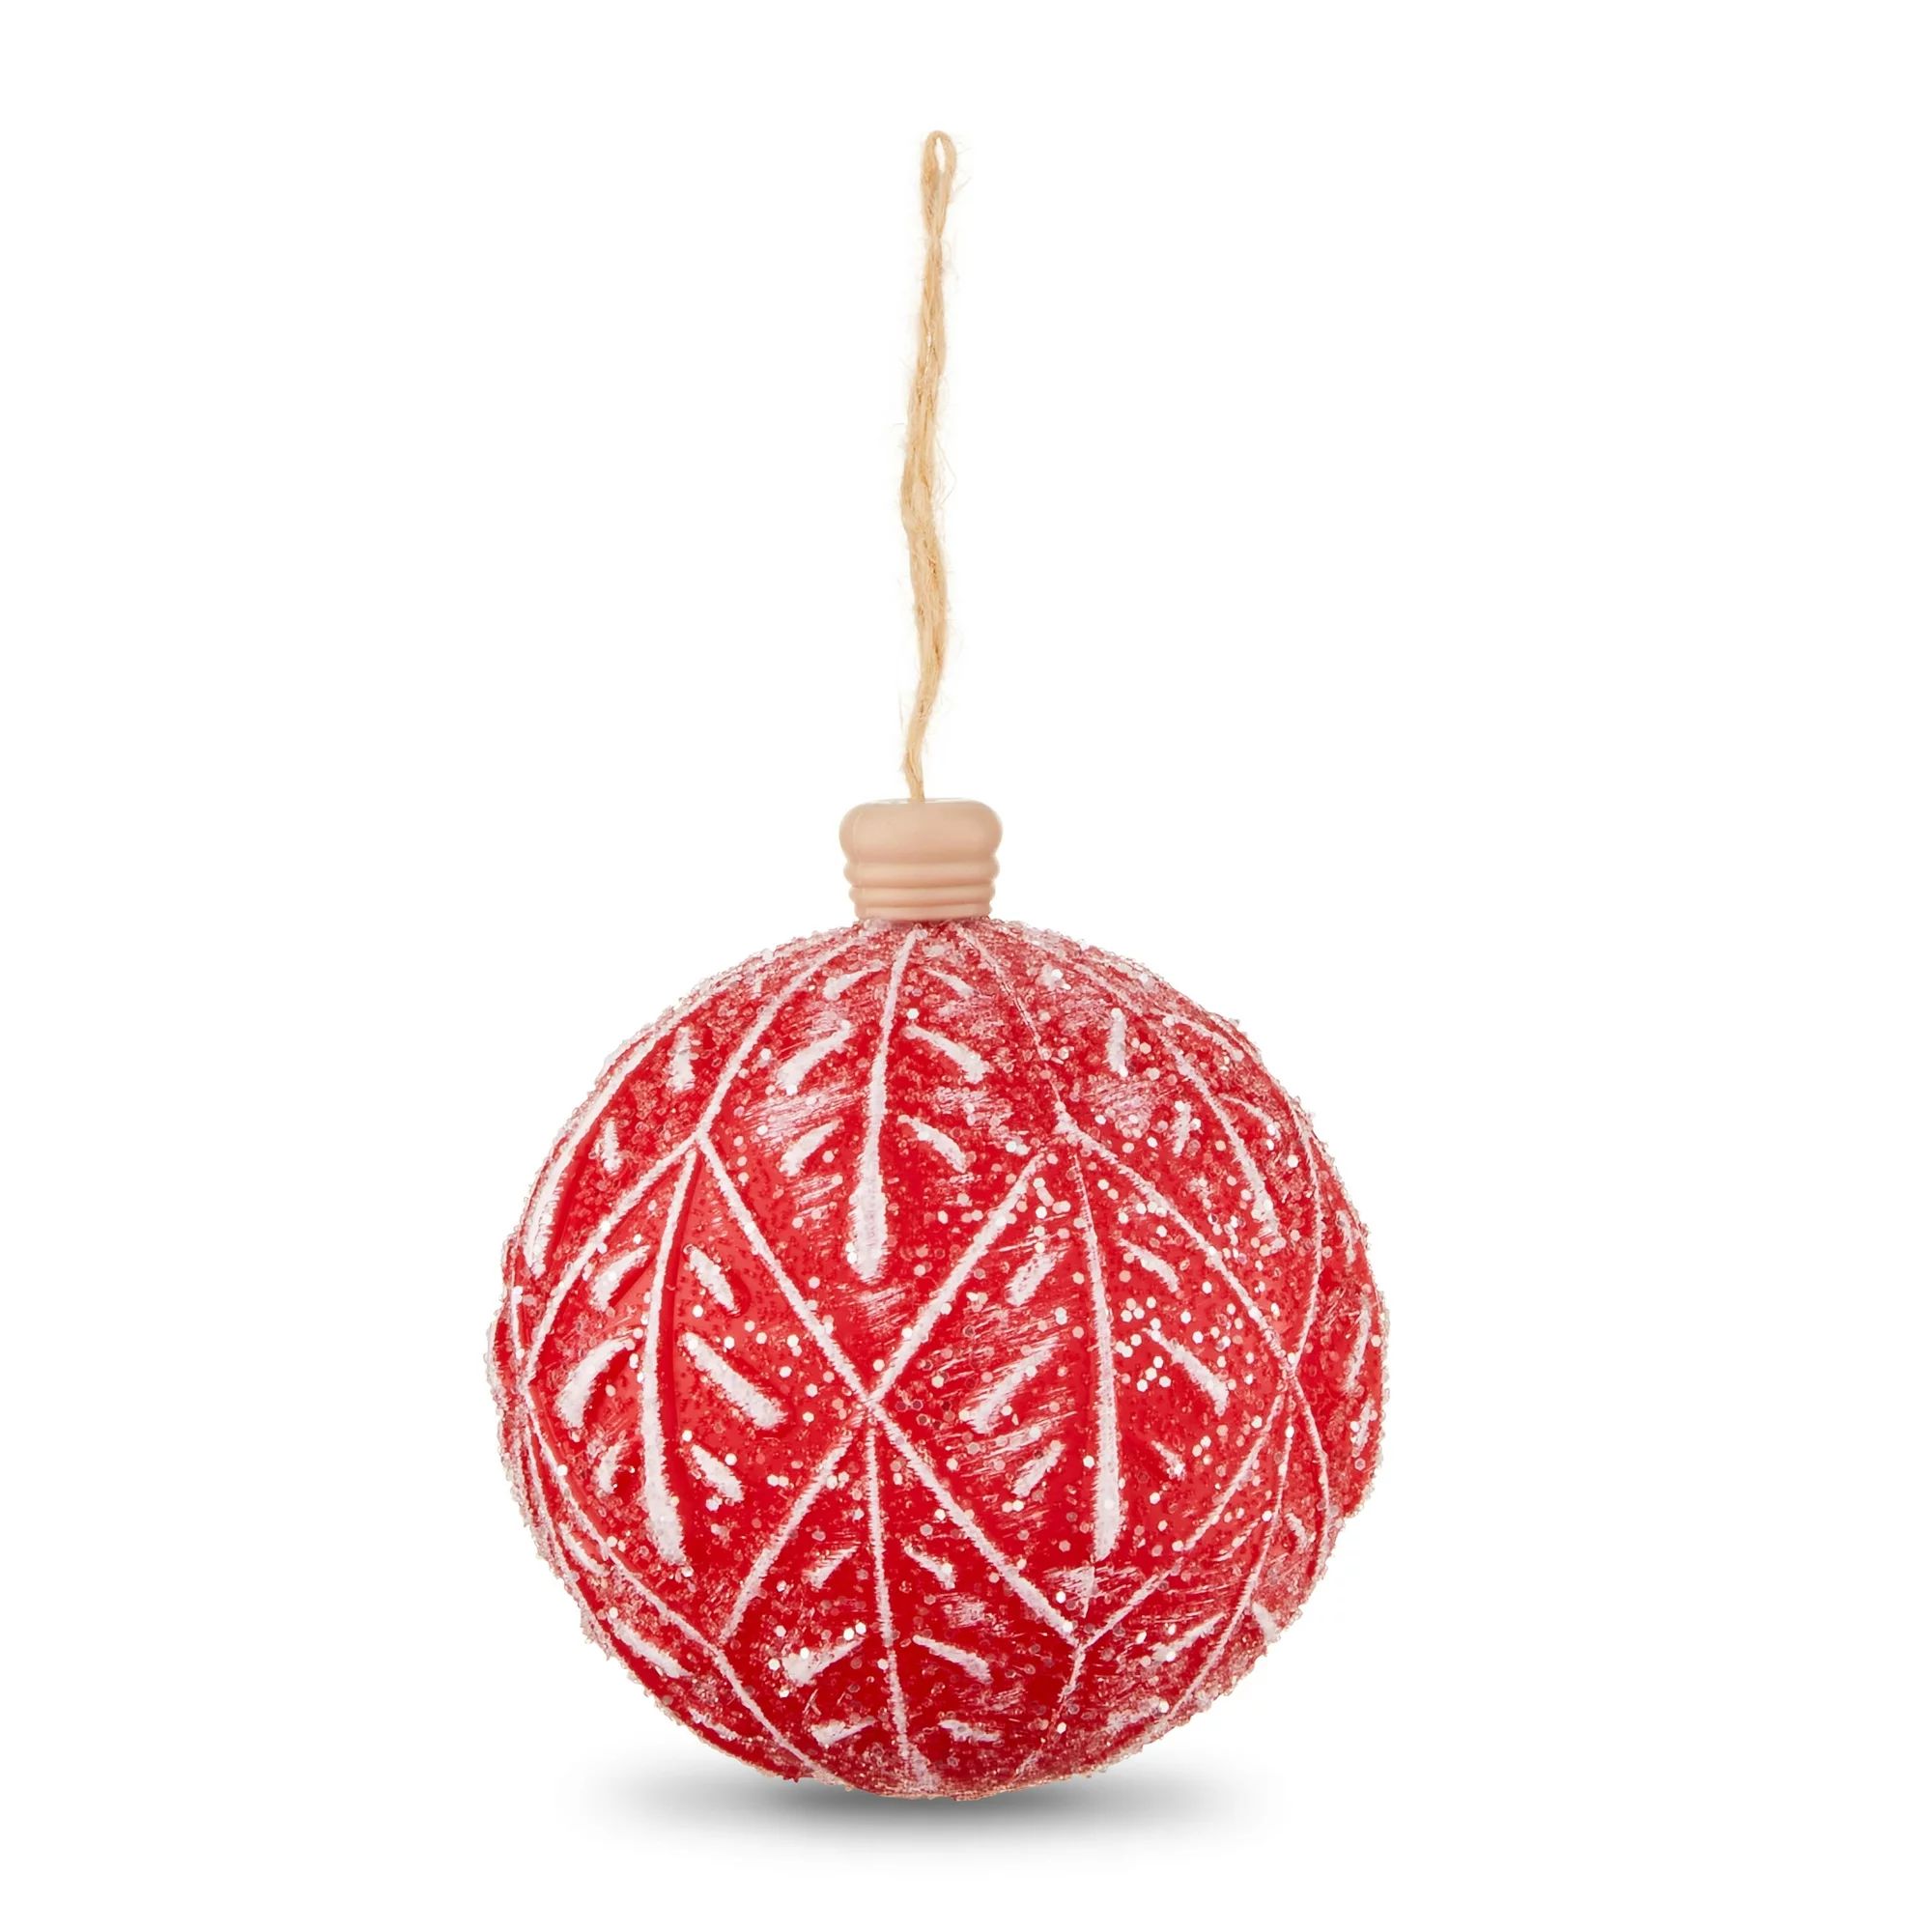 Red and White Embossed Leaves Christmas Ball Ornament Set,8 Count, by Holiday Time | Walmart (US)